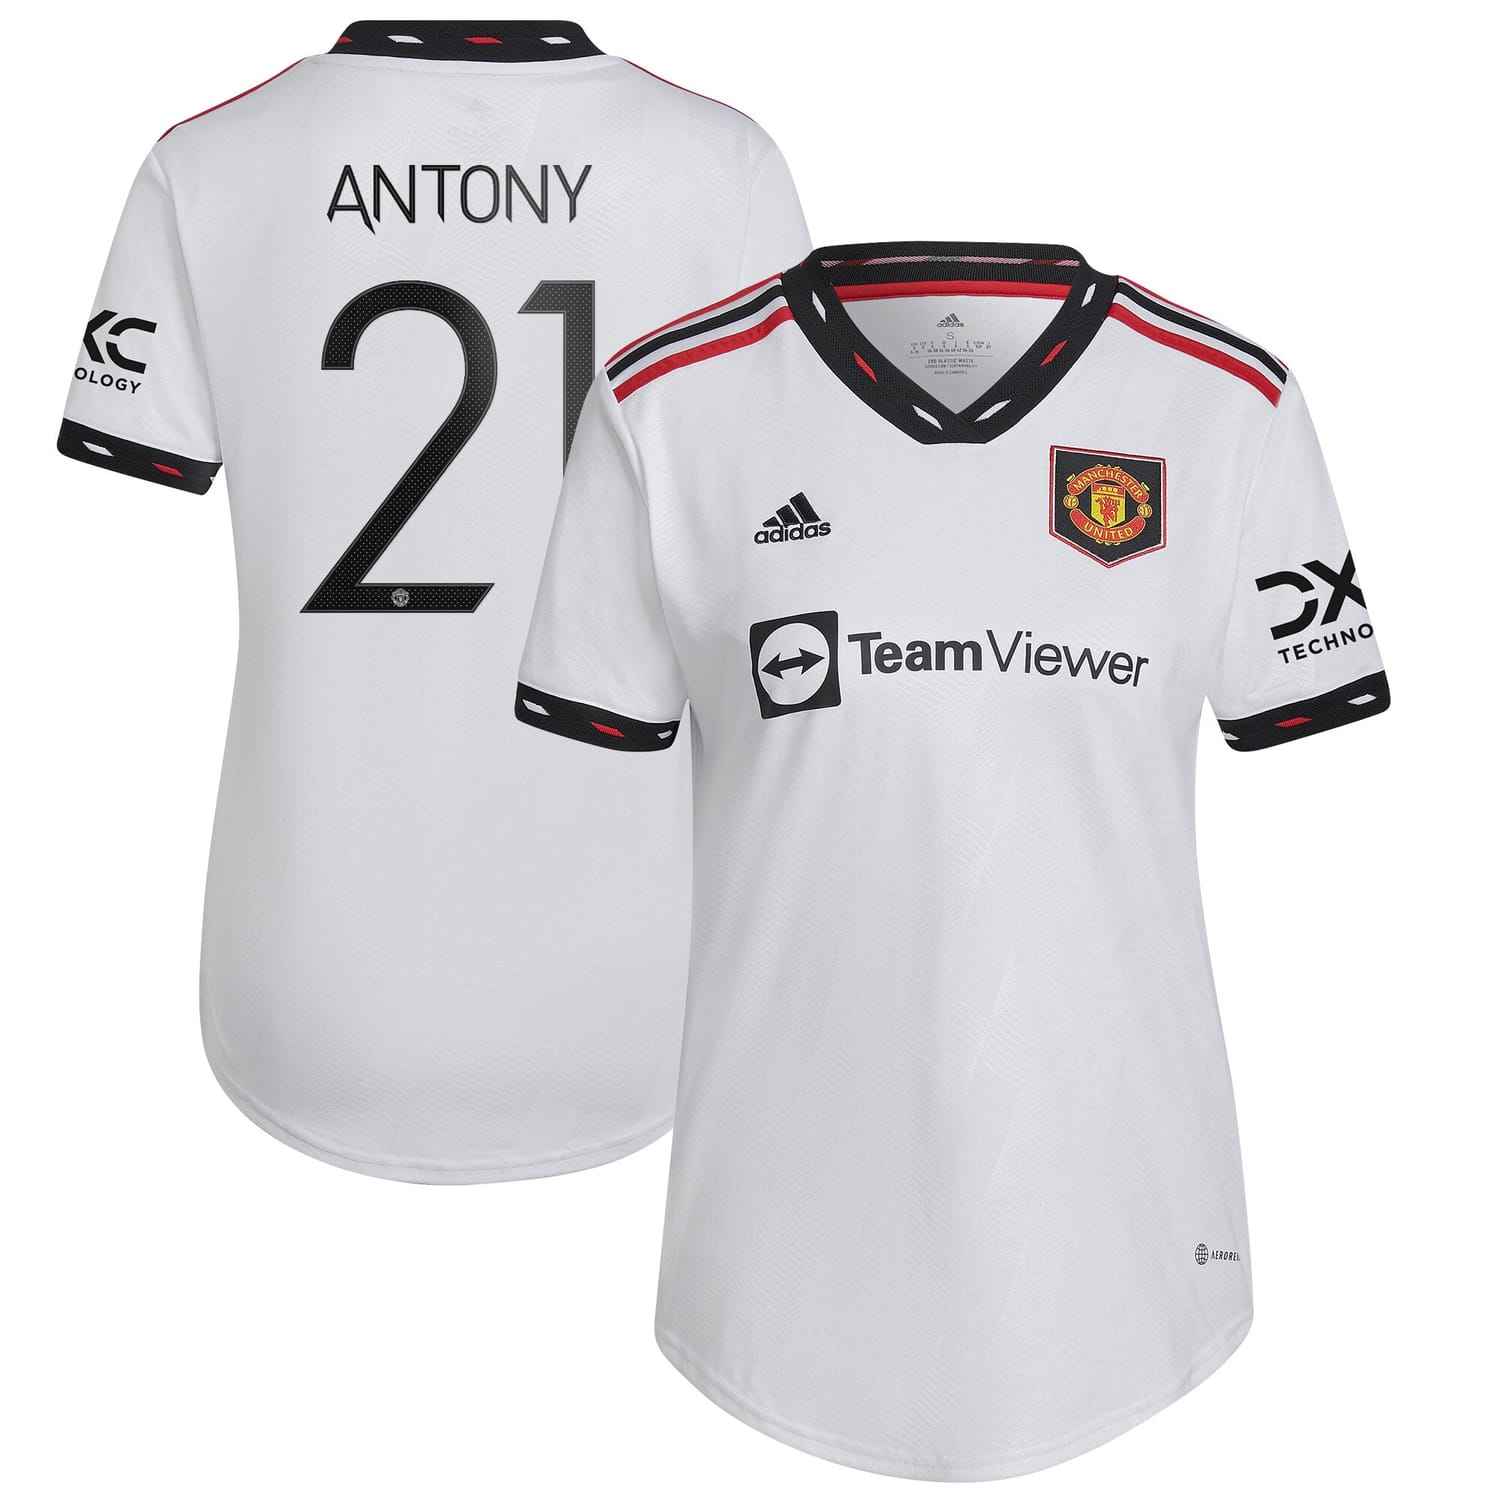 Premier League Manchester United Away Cup Jersey Shirt 2022-23 player Antony 21 printing for Women